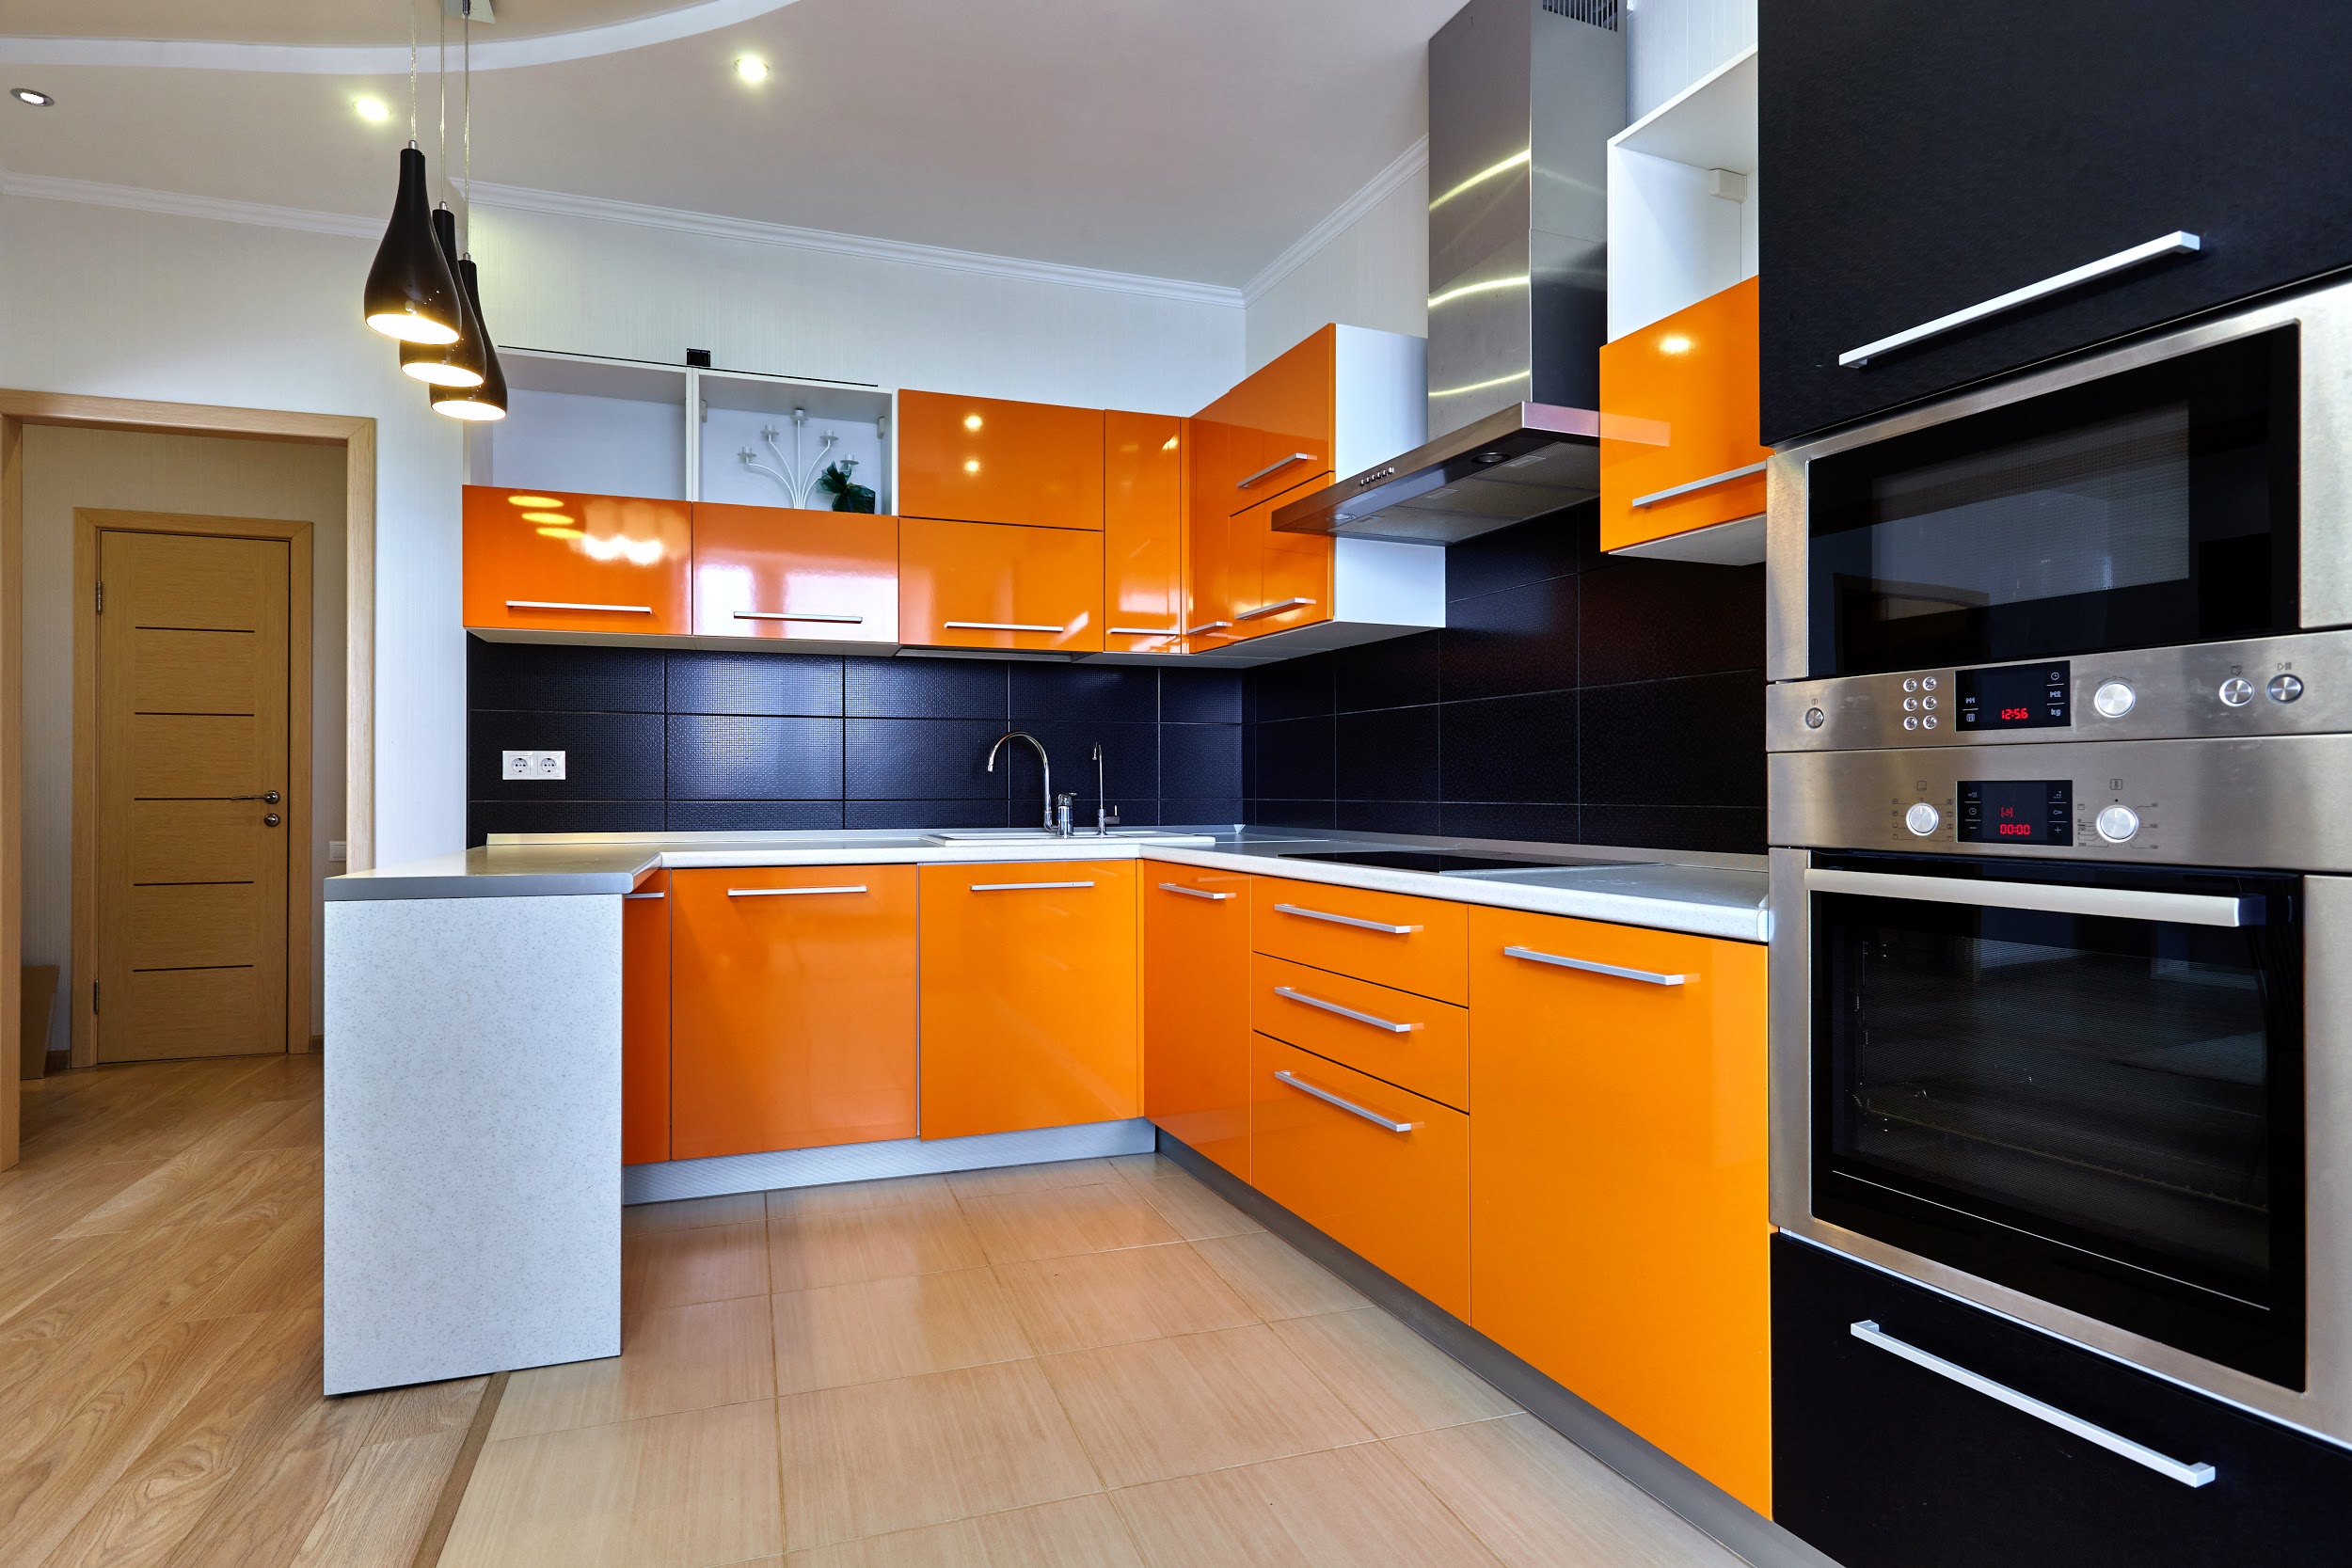 images of textured colorful kitchen wall